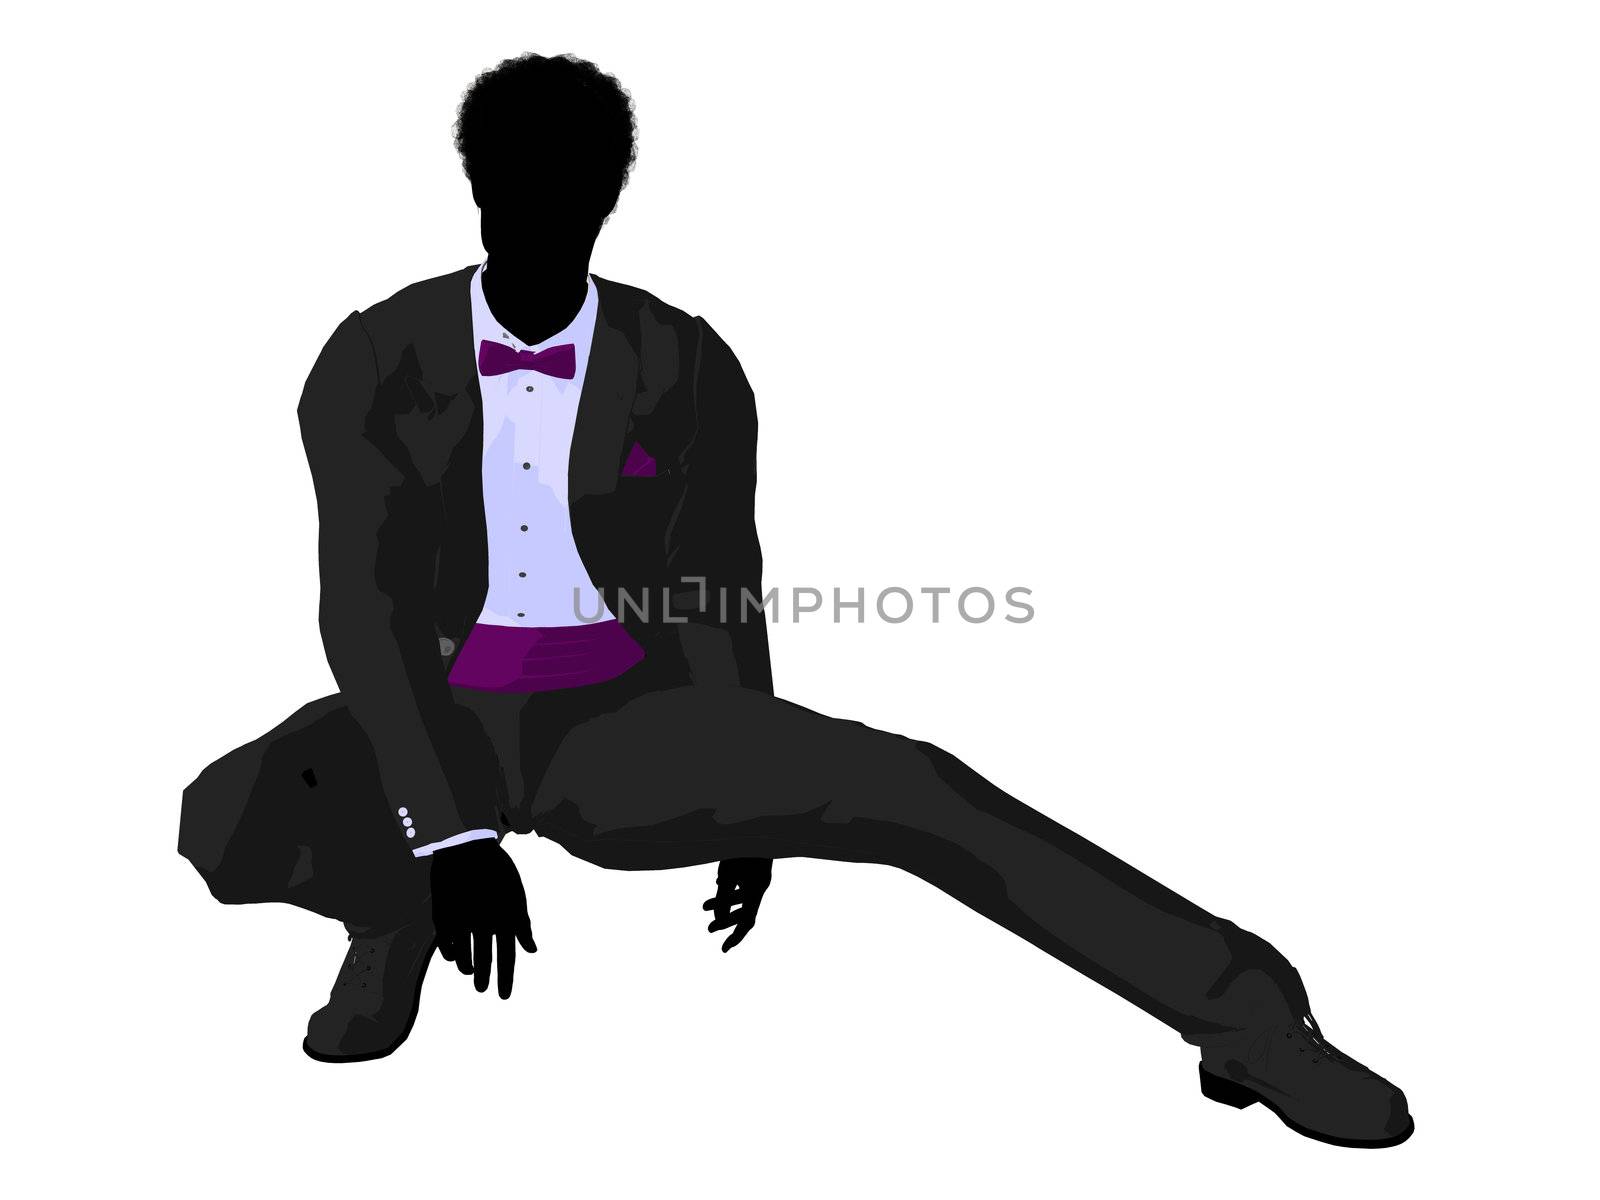 African american wedding groom in a tuxedo silhouette illustration on a white background